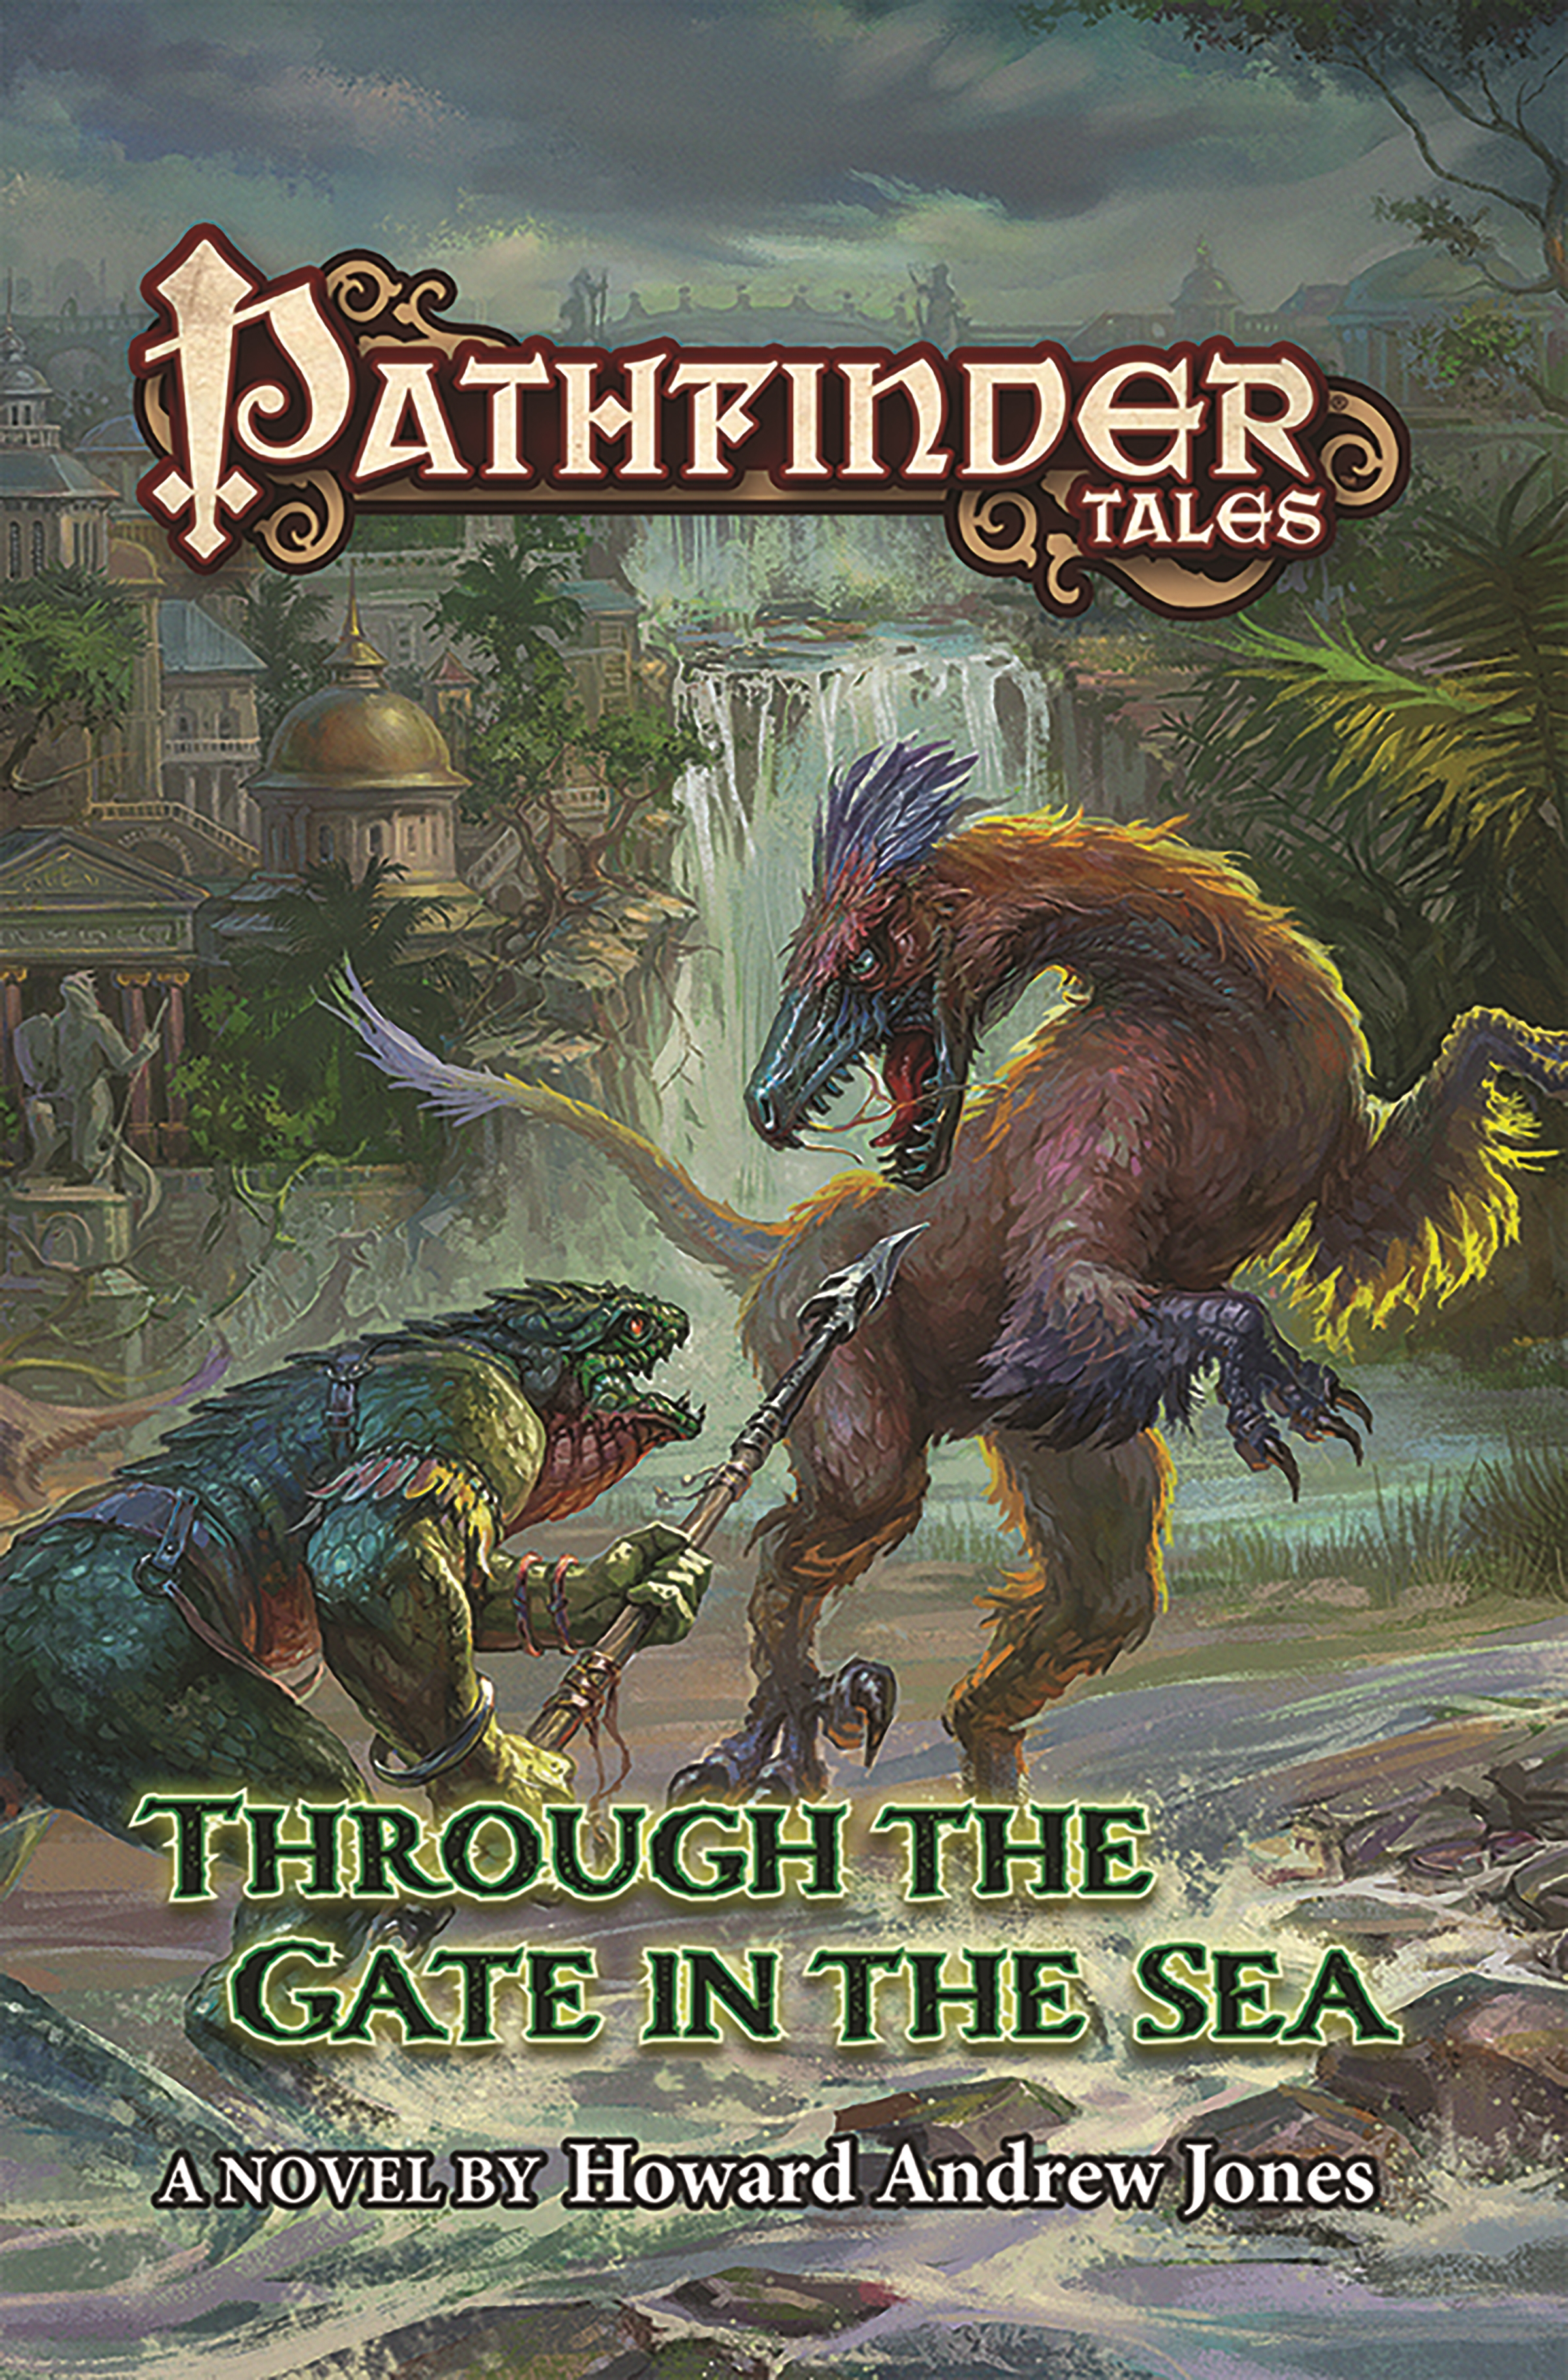 Pathfinder Tales: Through The Gate in the Sea by Howard Andrew Jones